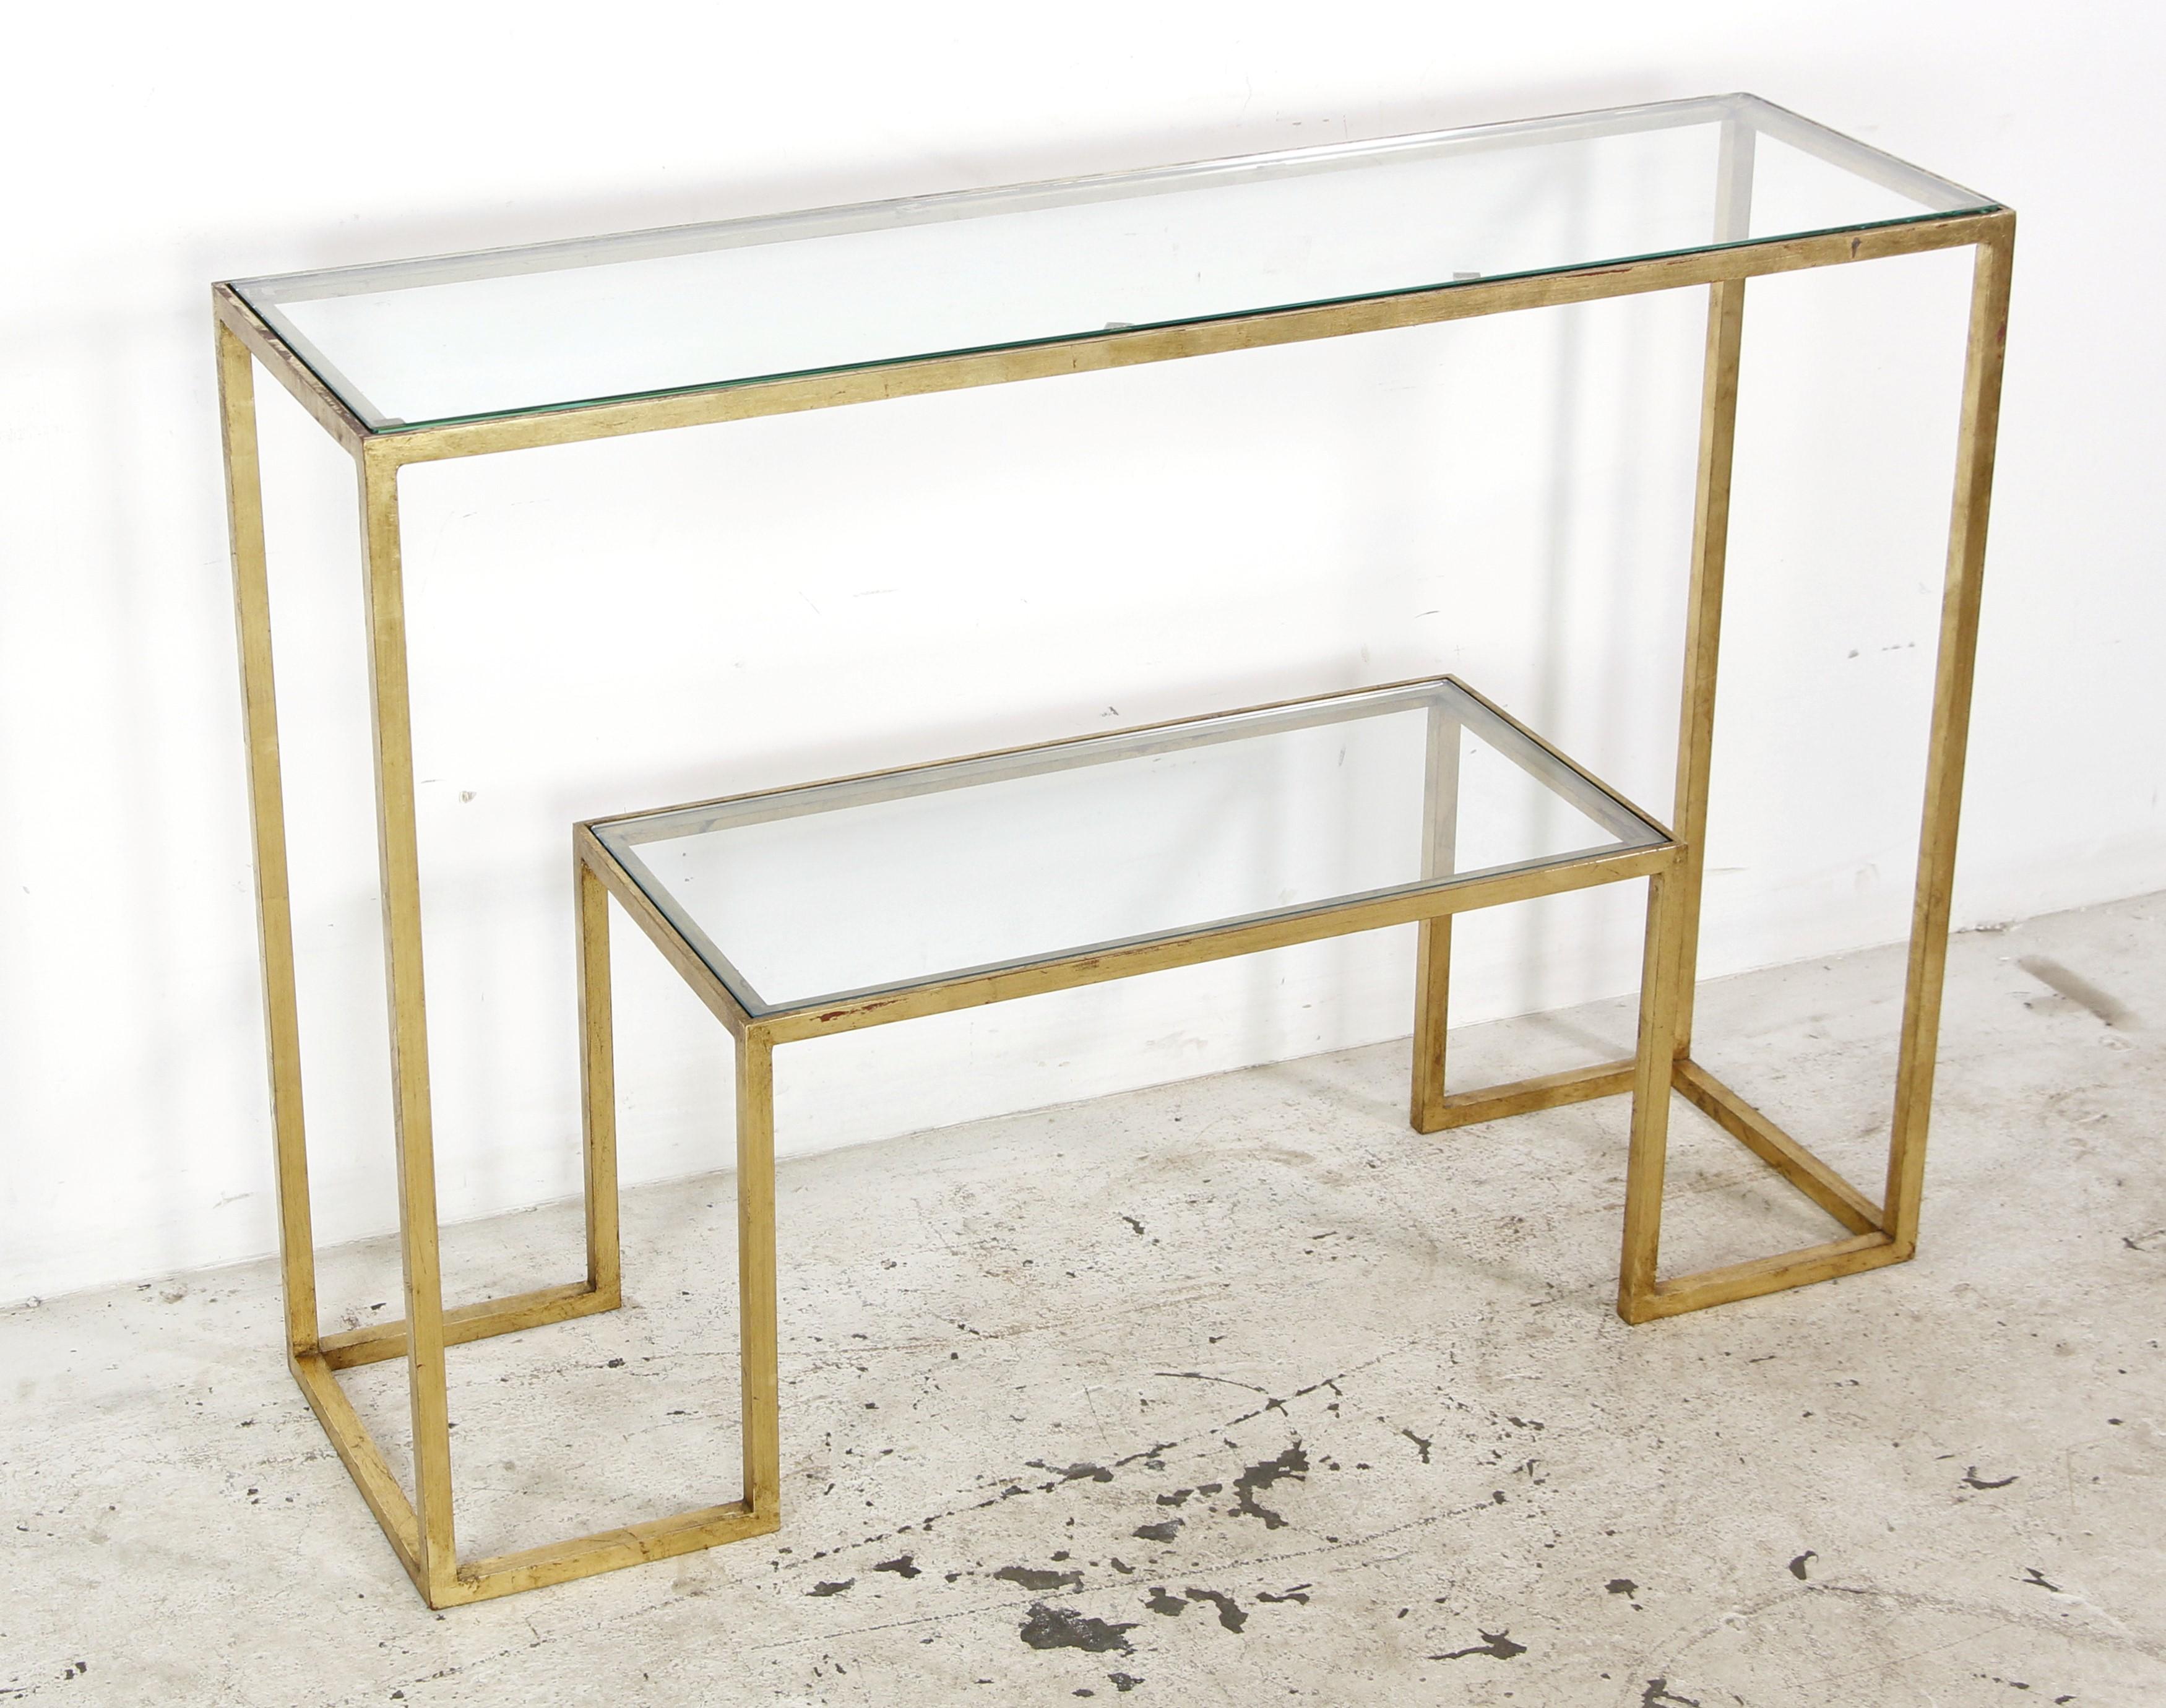 This French two tier console table is a Mid-Century Modern piece attributed to the renowned French designer Jean Royere, it embodies artistic innovation. This console table is gilded steel and with glass tiers. It is the style of European